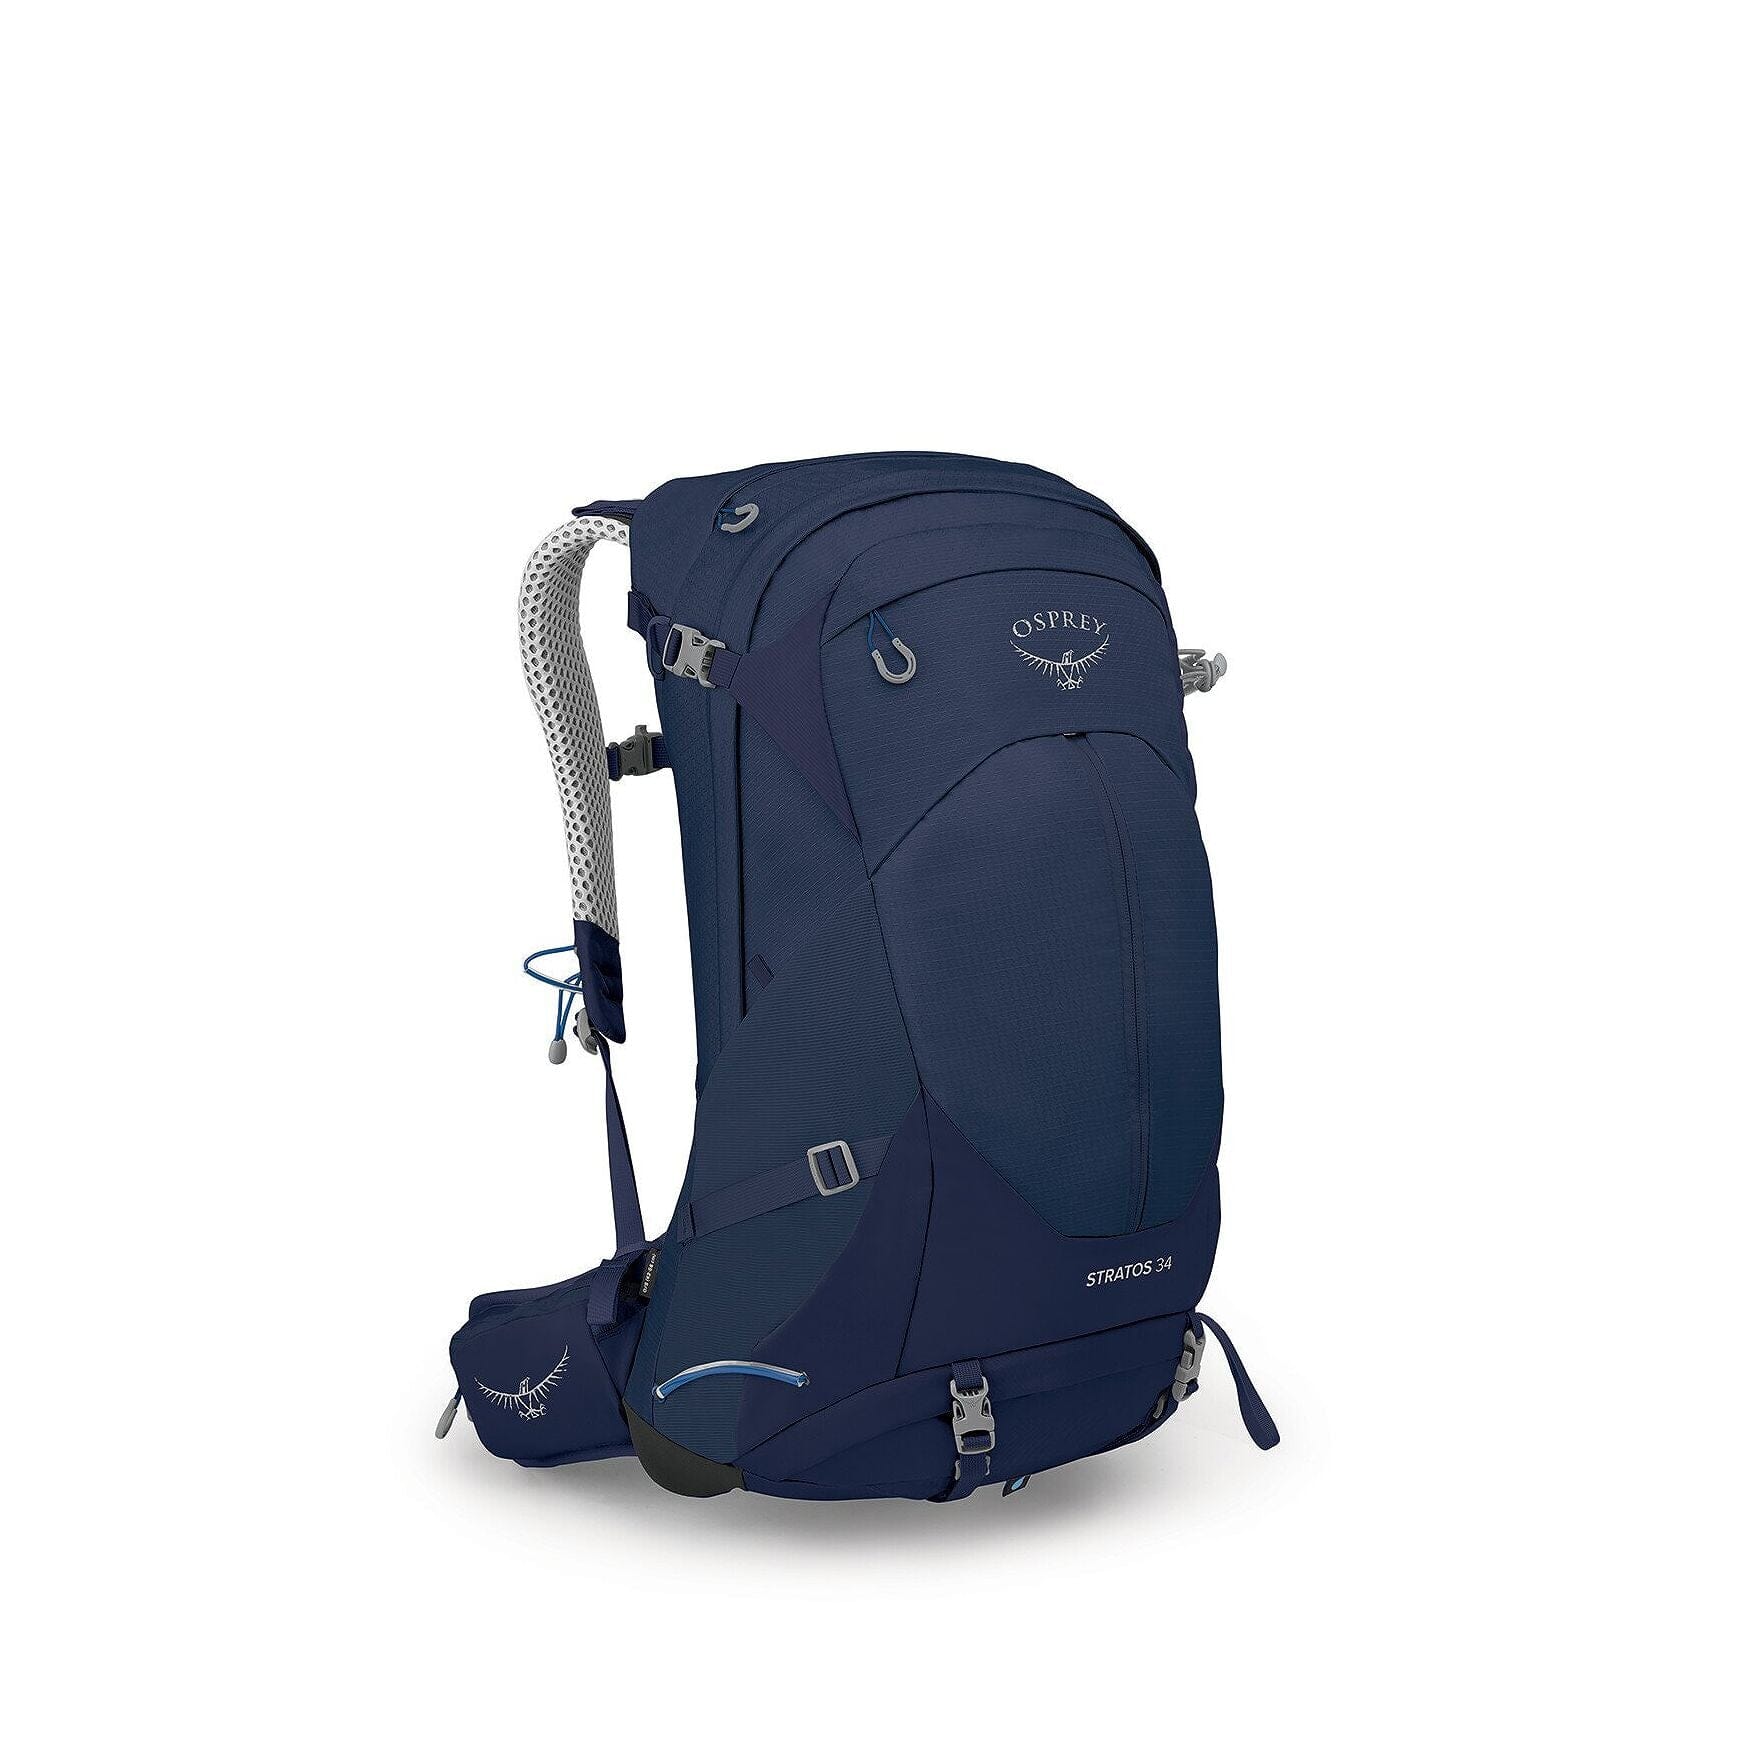 Osprey Stratos 34 Litre Men's Hiking Daypack / Overnight Backpack - Zip Panel Opening Cetacean Blue One Size 